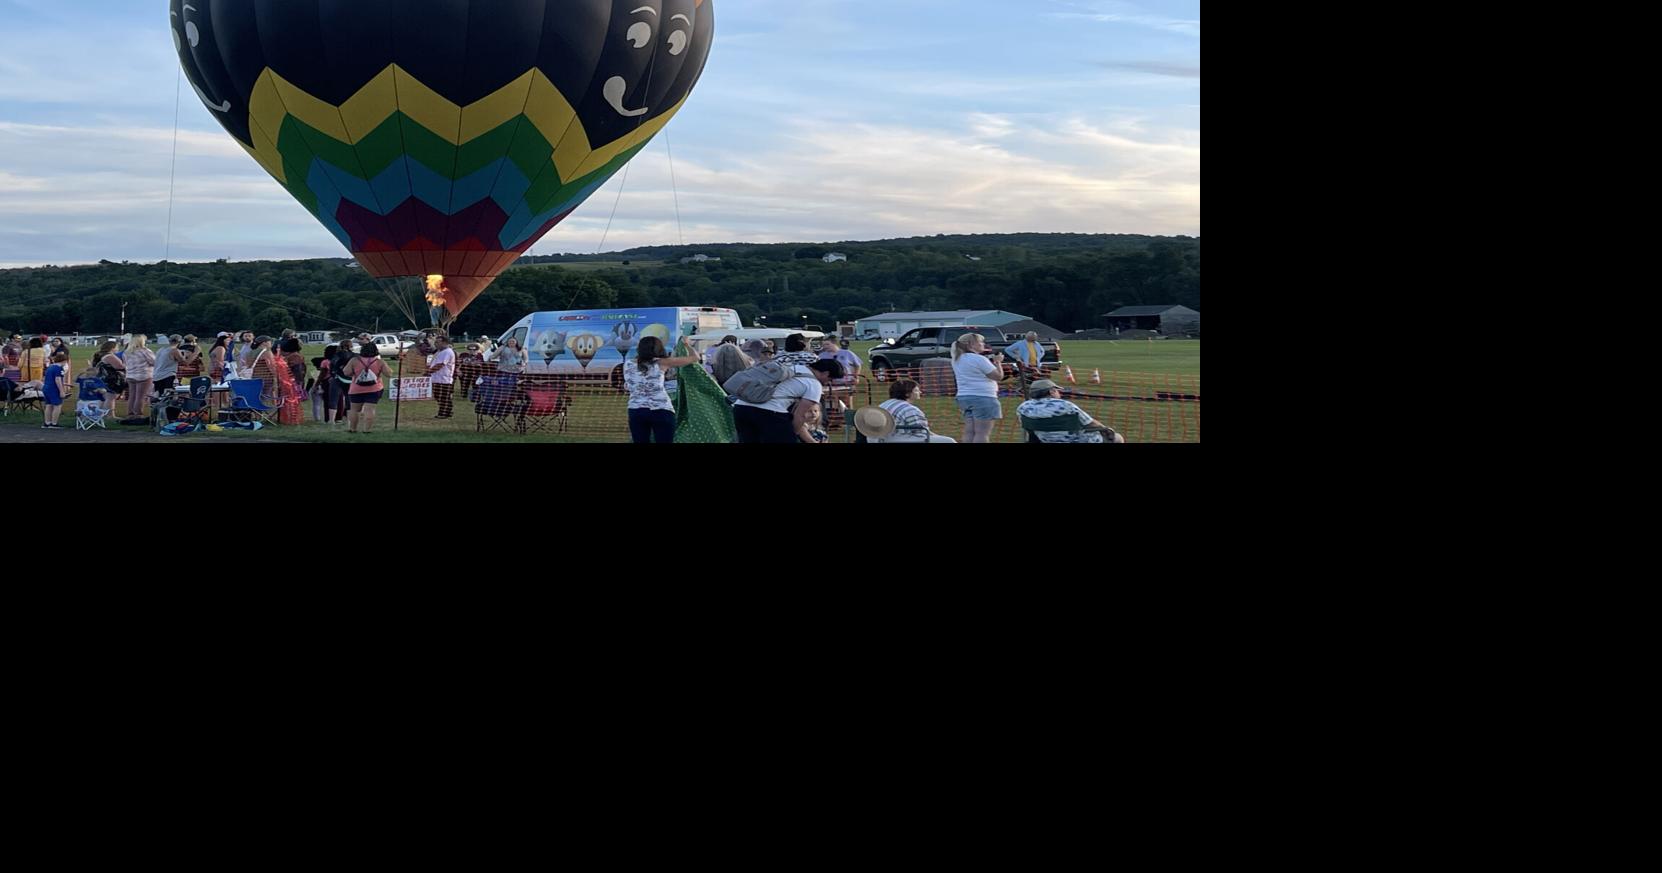 Gift to the Valley Dansville Hot Air Balloon Festival Revitalizes